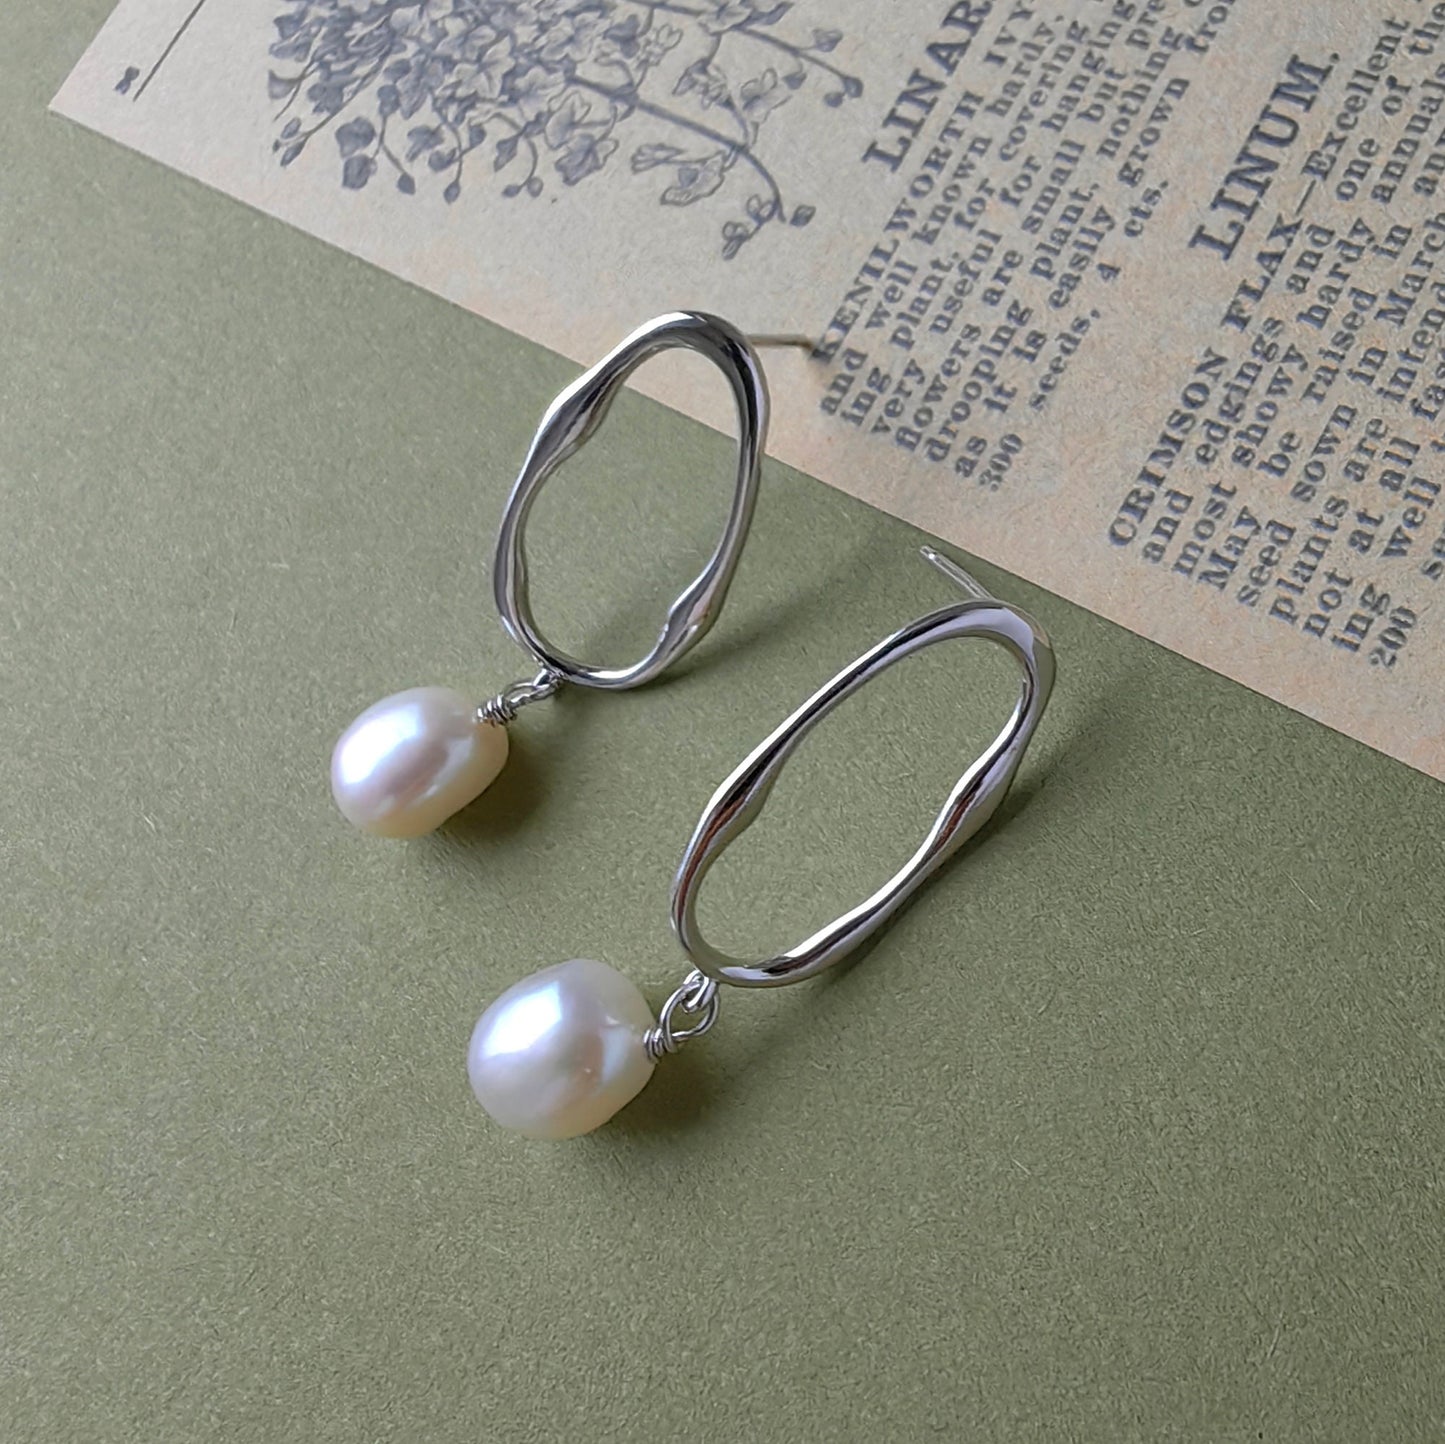 925 Sterling silver Long Oval Circle Dangle Drop Earrings with Pearls